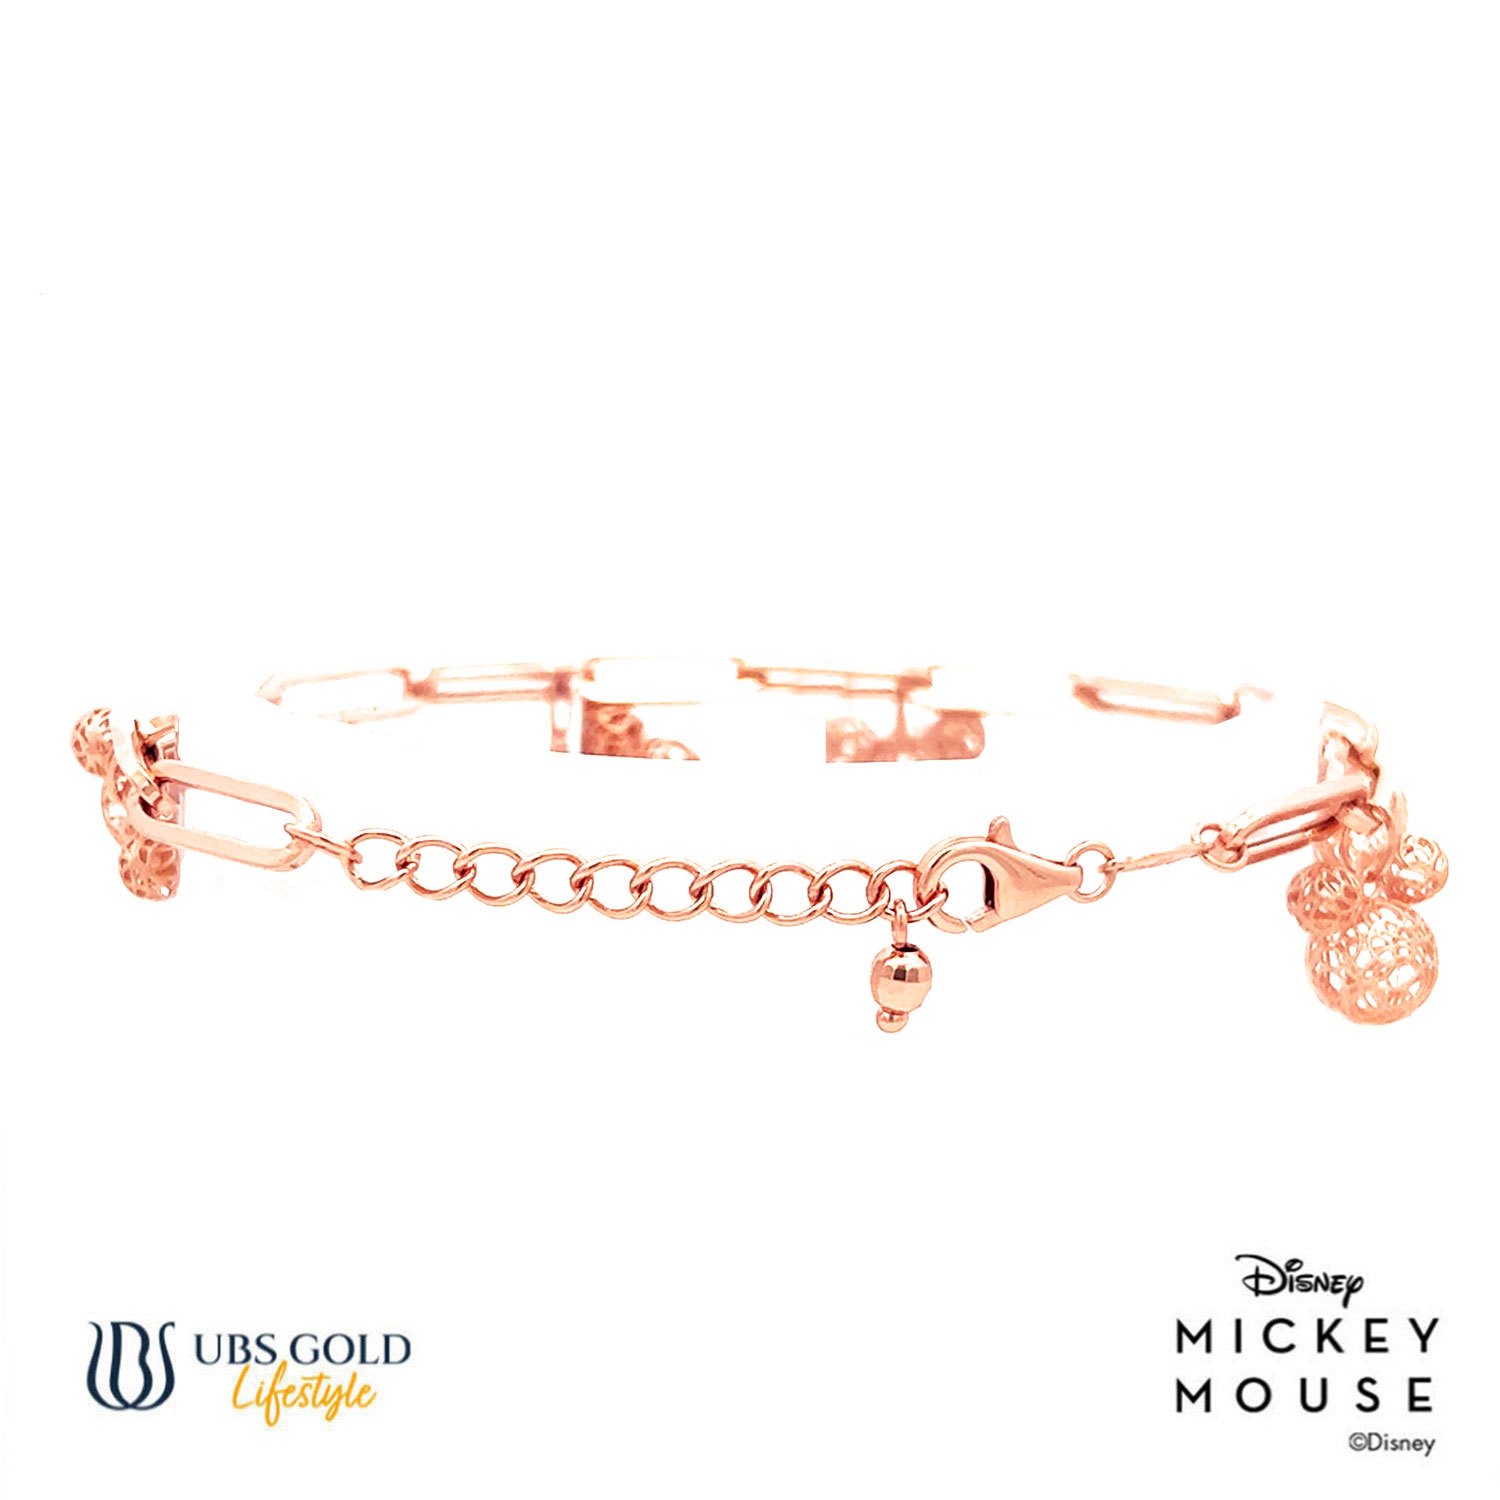 UBS Gold Gelang Emas Disney Mickey Minnie Mouse - Hgy0146G - 17K